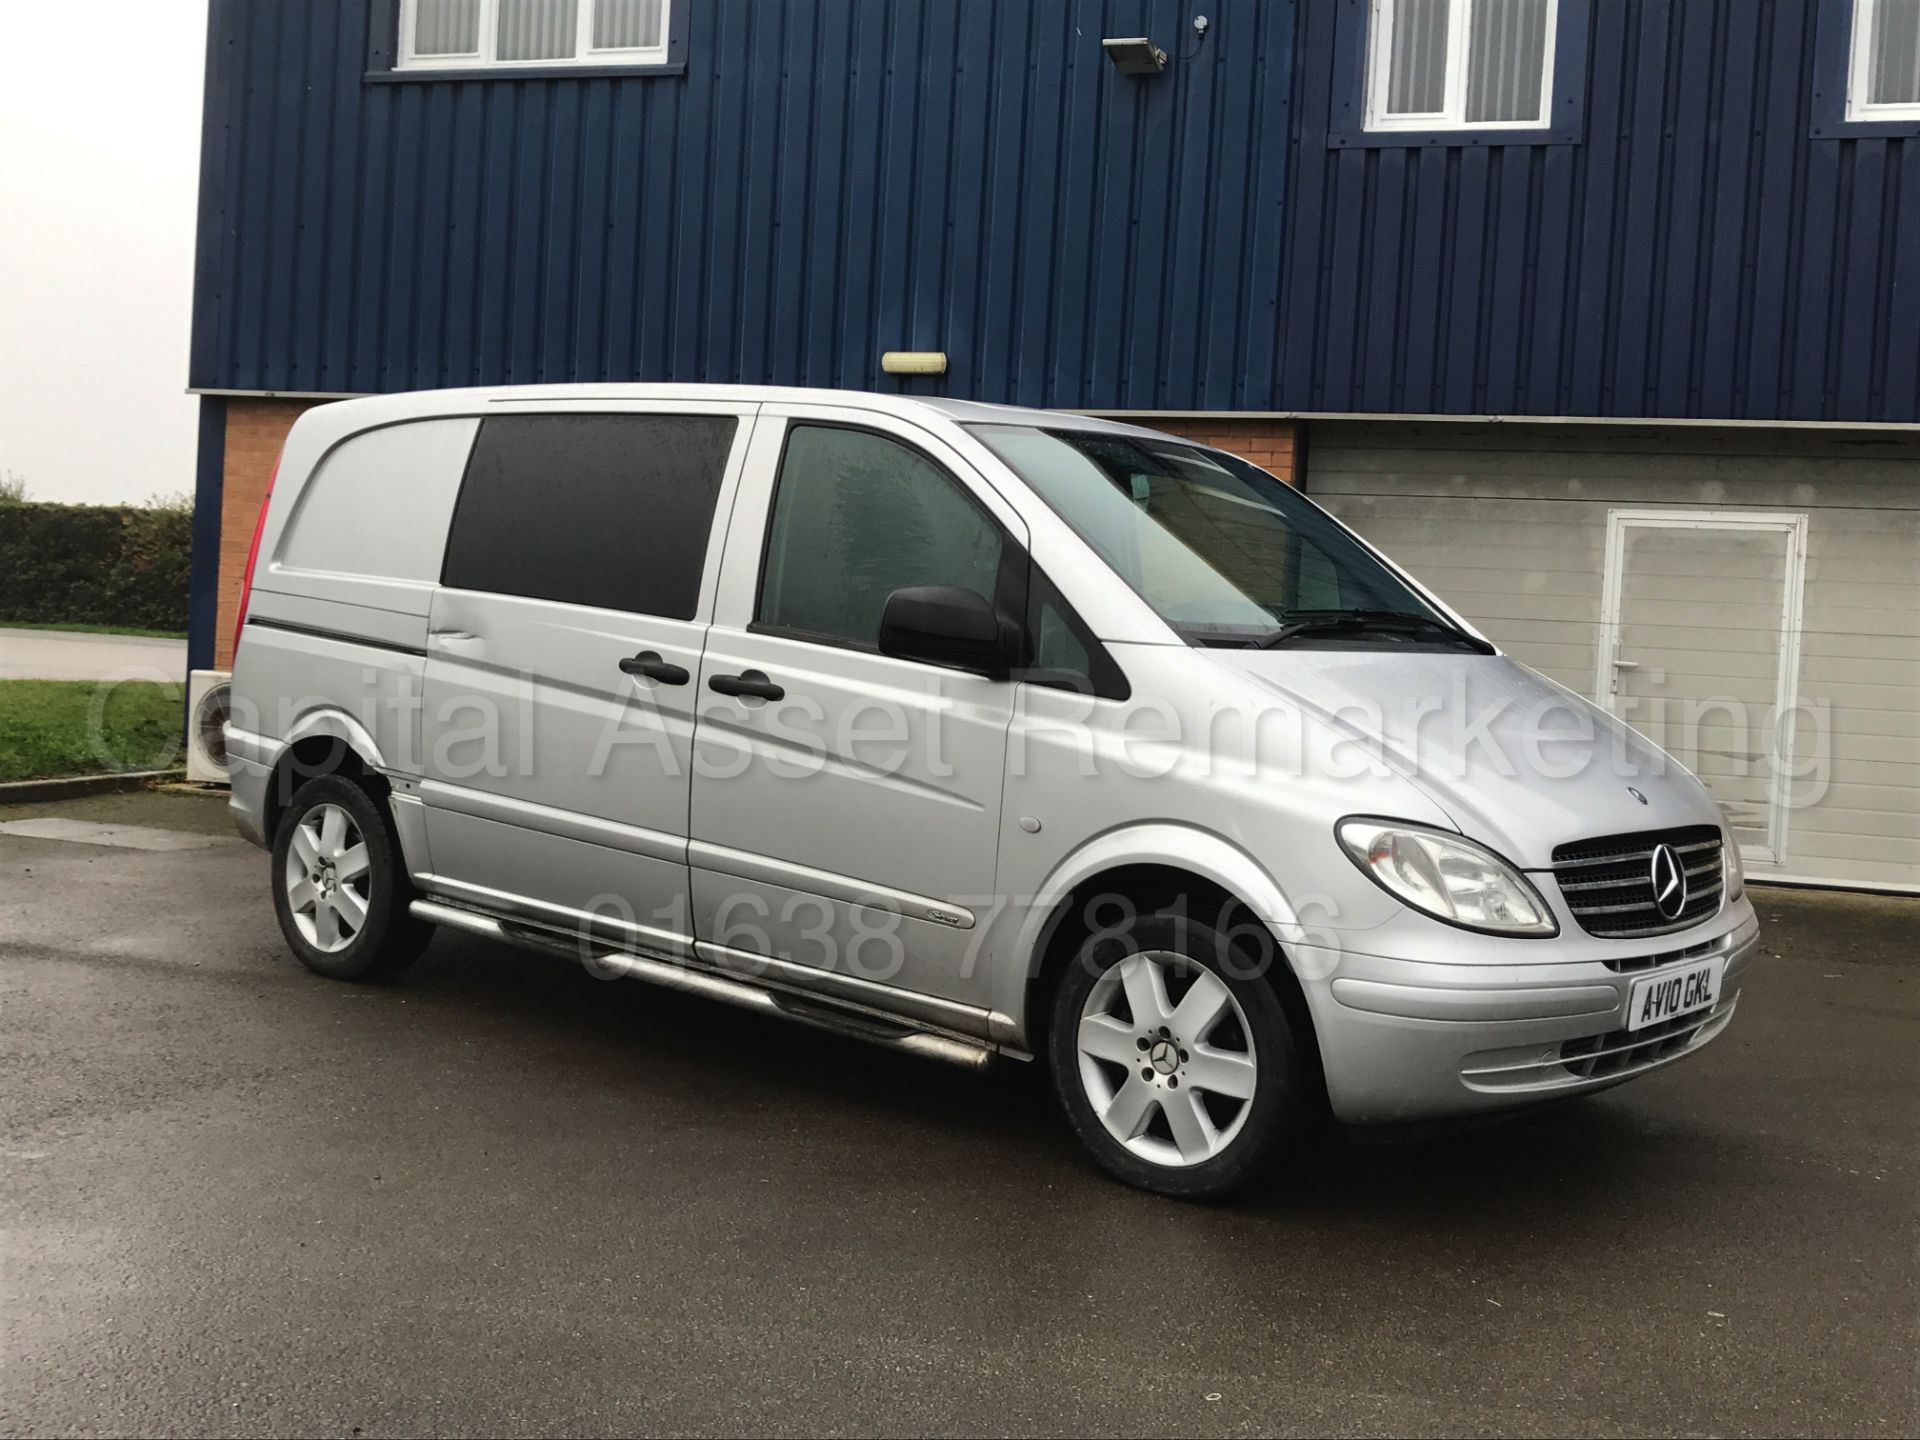 MERCEDES VITO *SPORT* '5 SEATER DUELINER' (2010 - 10 REG) '2.1 CDI - 150 BHP - 6 SPEED' **AIR CON** - Image 2 of 35